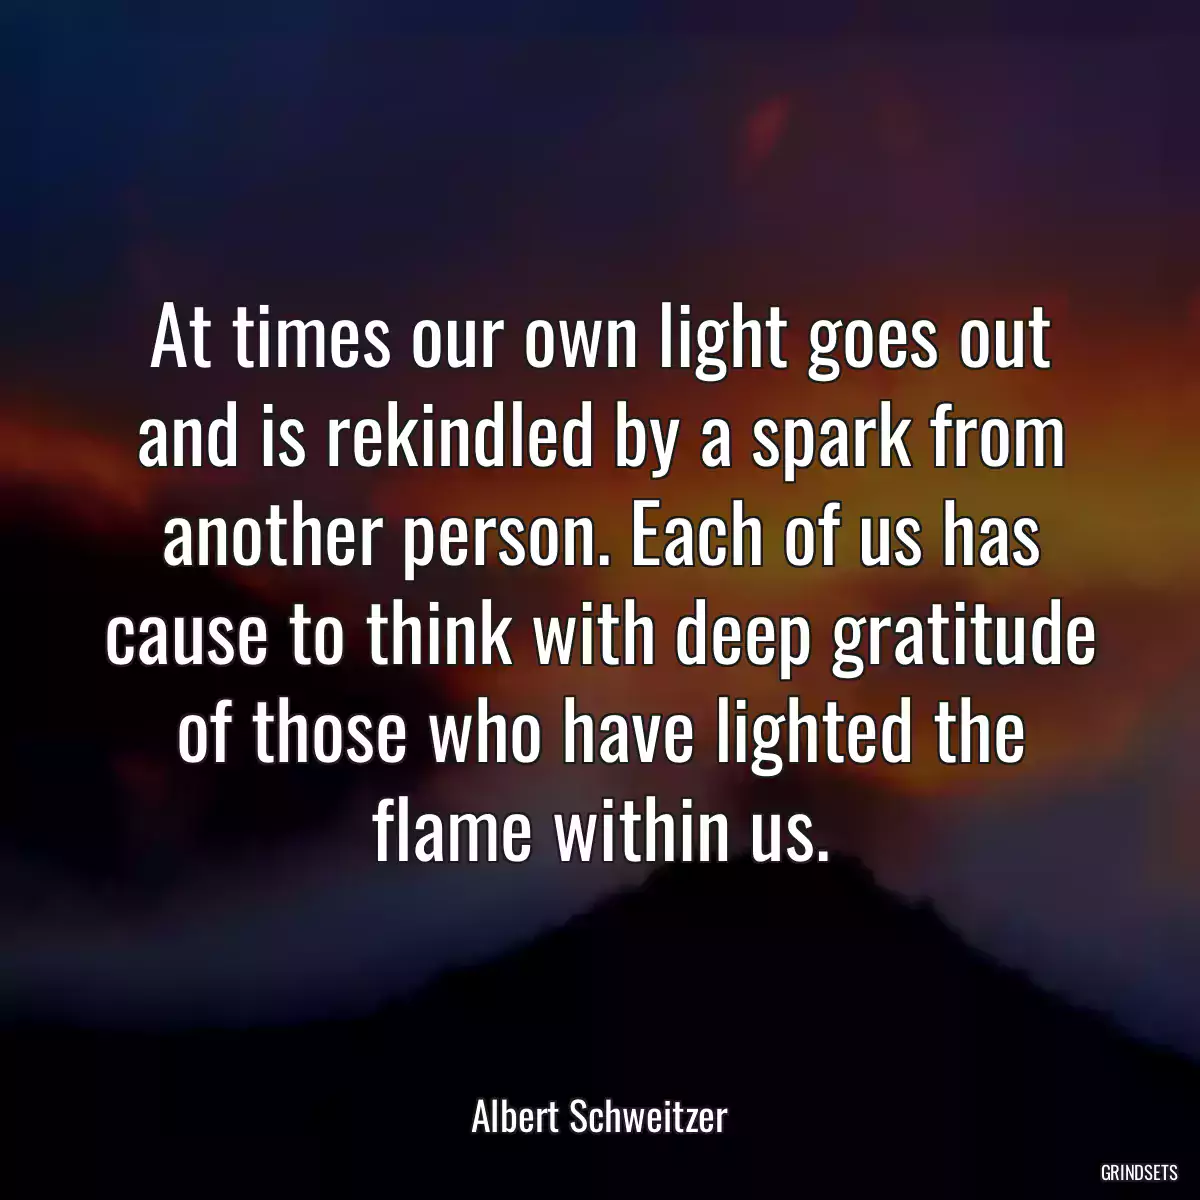 At times our own light goes out and is rekindled by a spark from another person. Each of us has cause to think with deep gratitude of those who have lighted the flame within us.